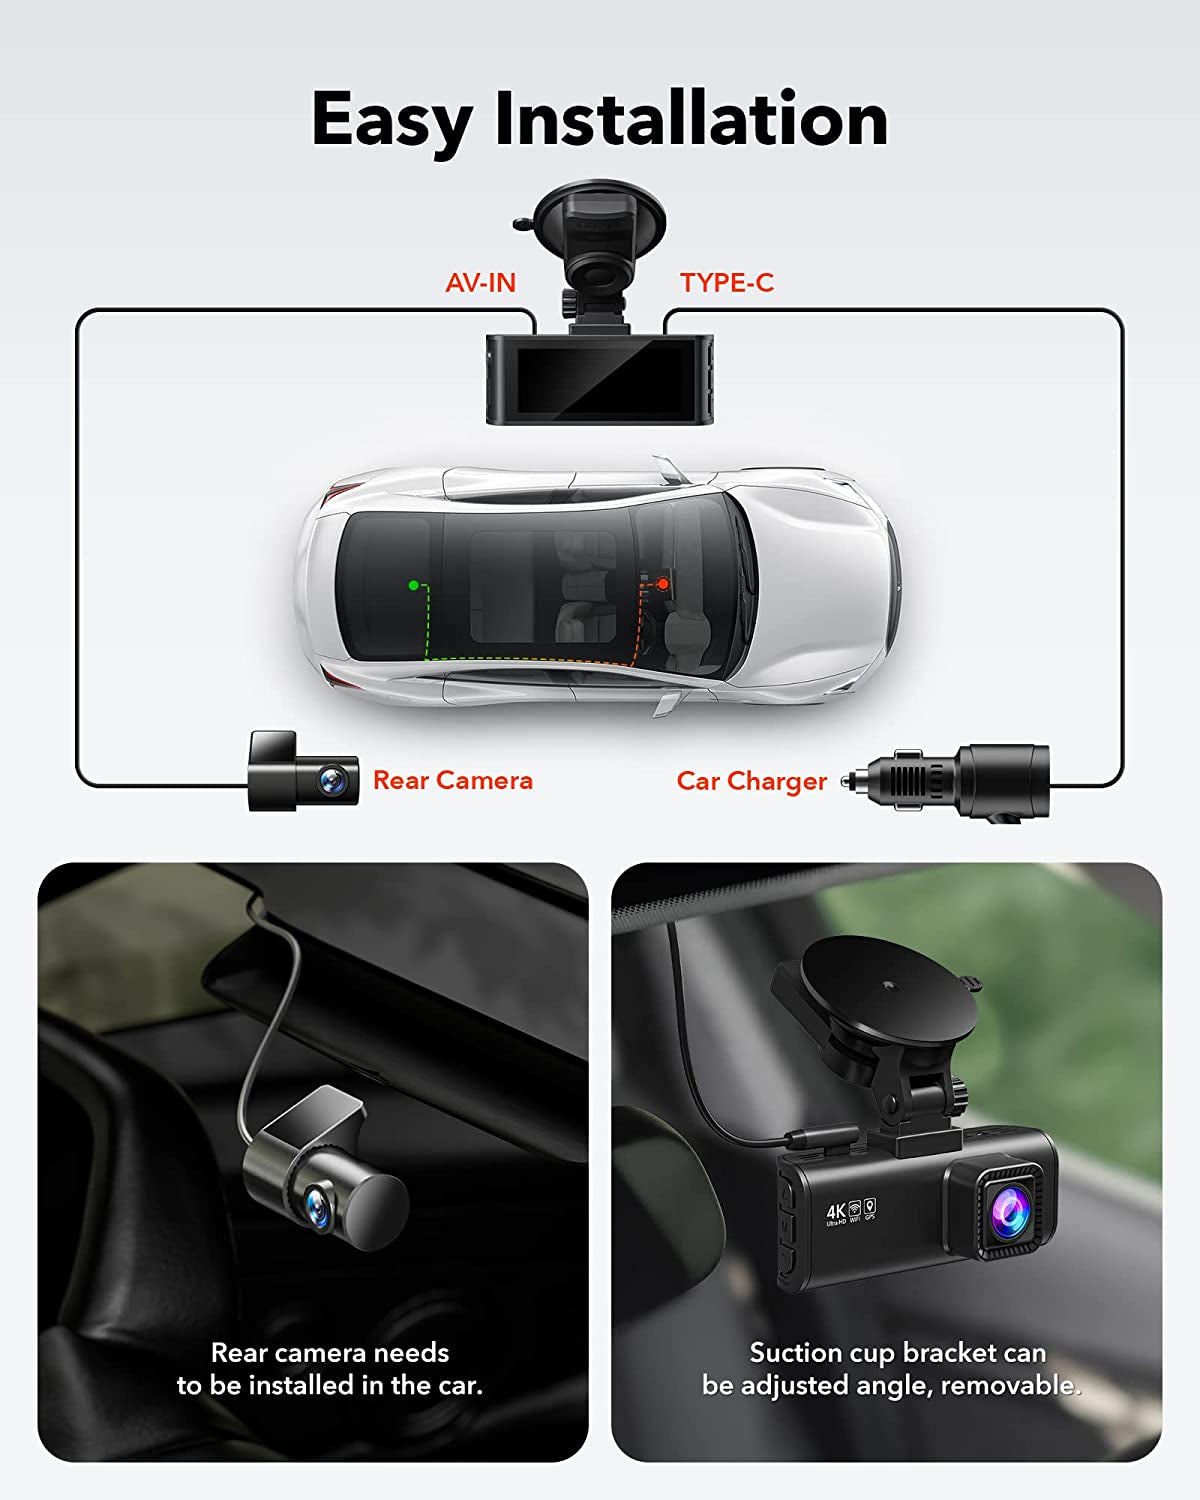 Dash Cam Front Rear, 4K/2.5K Full HD Dash Camera for Cars, Free 32GB SD Card, Built-In Wi-Fi GPS, 3.18” IPS Screen, Night Vision, 170°Wide Angle, WDR, 24H Parking Mode